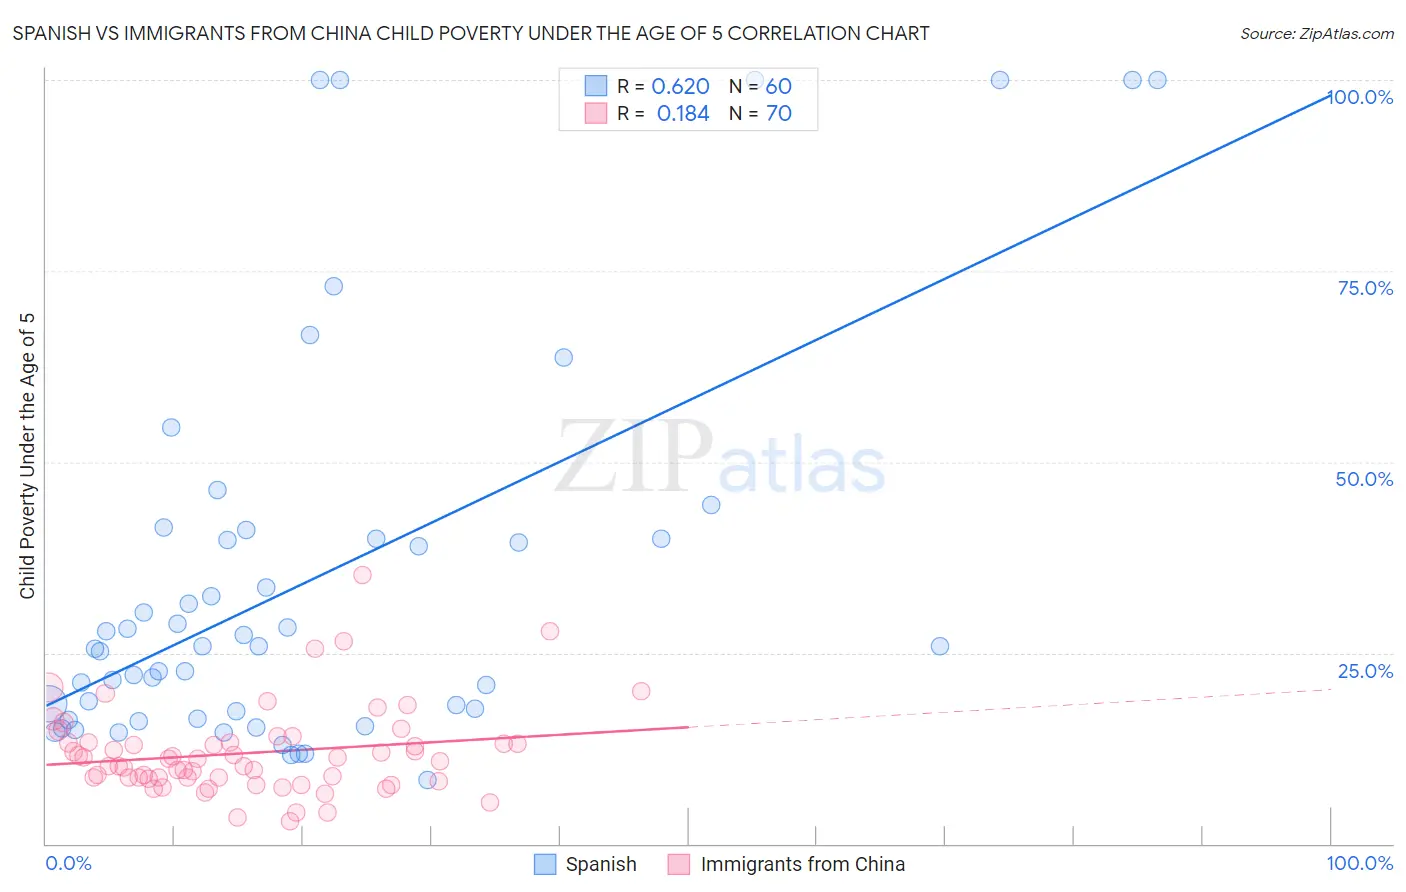 Spanish vs Immigrants from China Child Poverty Under the Age of 5